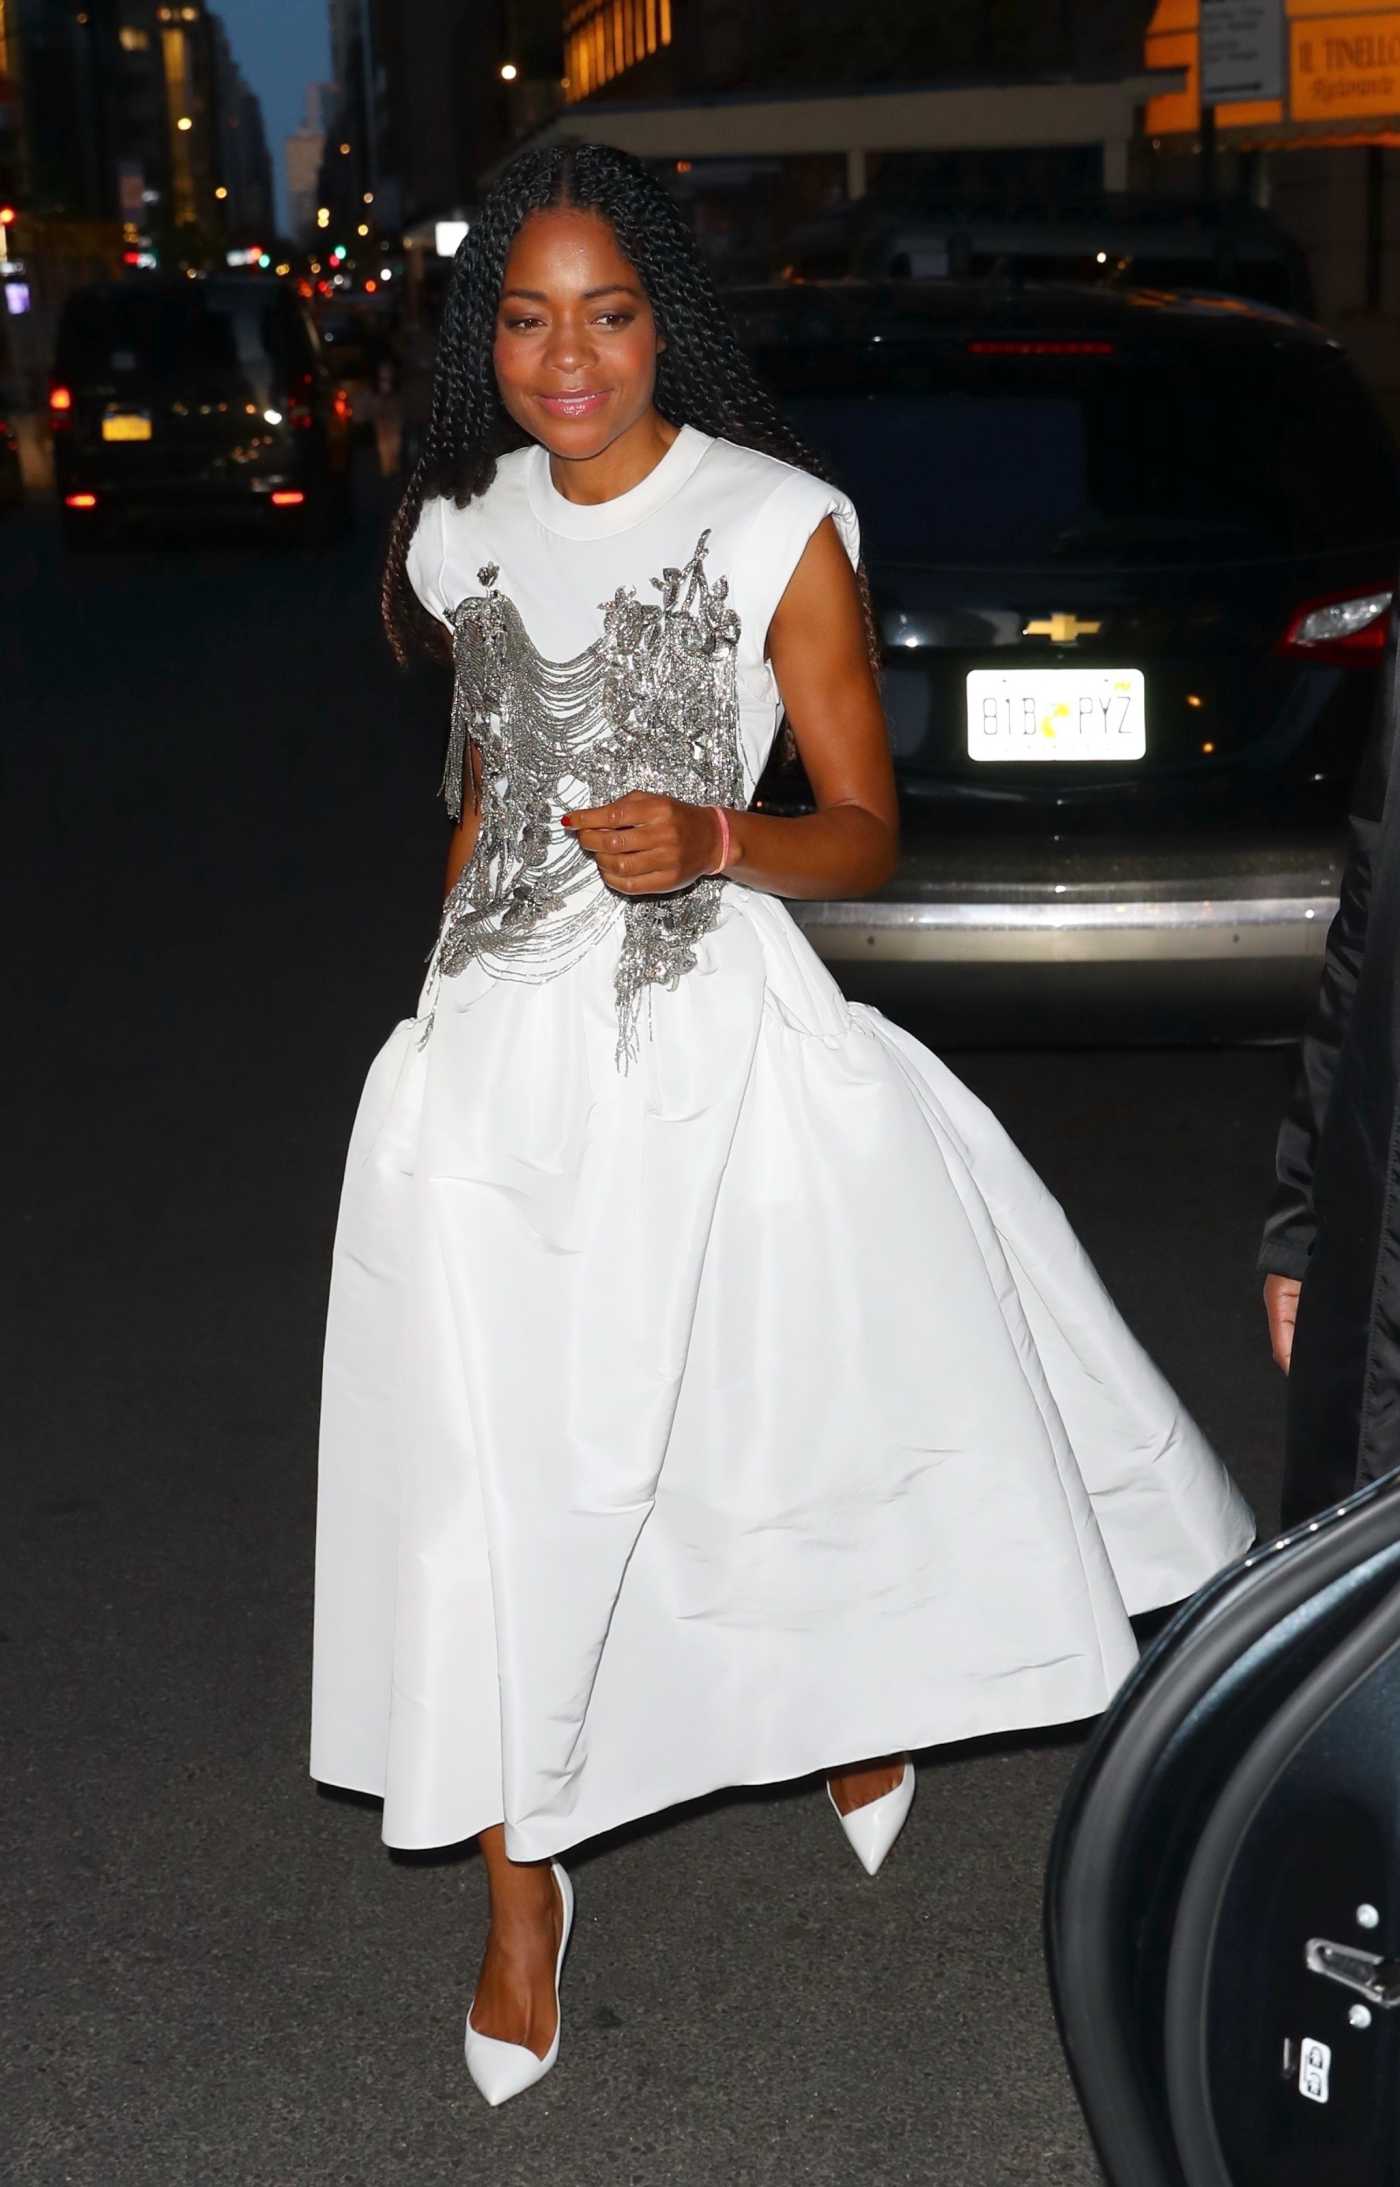 Naomie Harris in a White Dress Arrives for a Private Event at Omega 5th Avenue in New York 04/20/2022